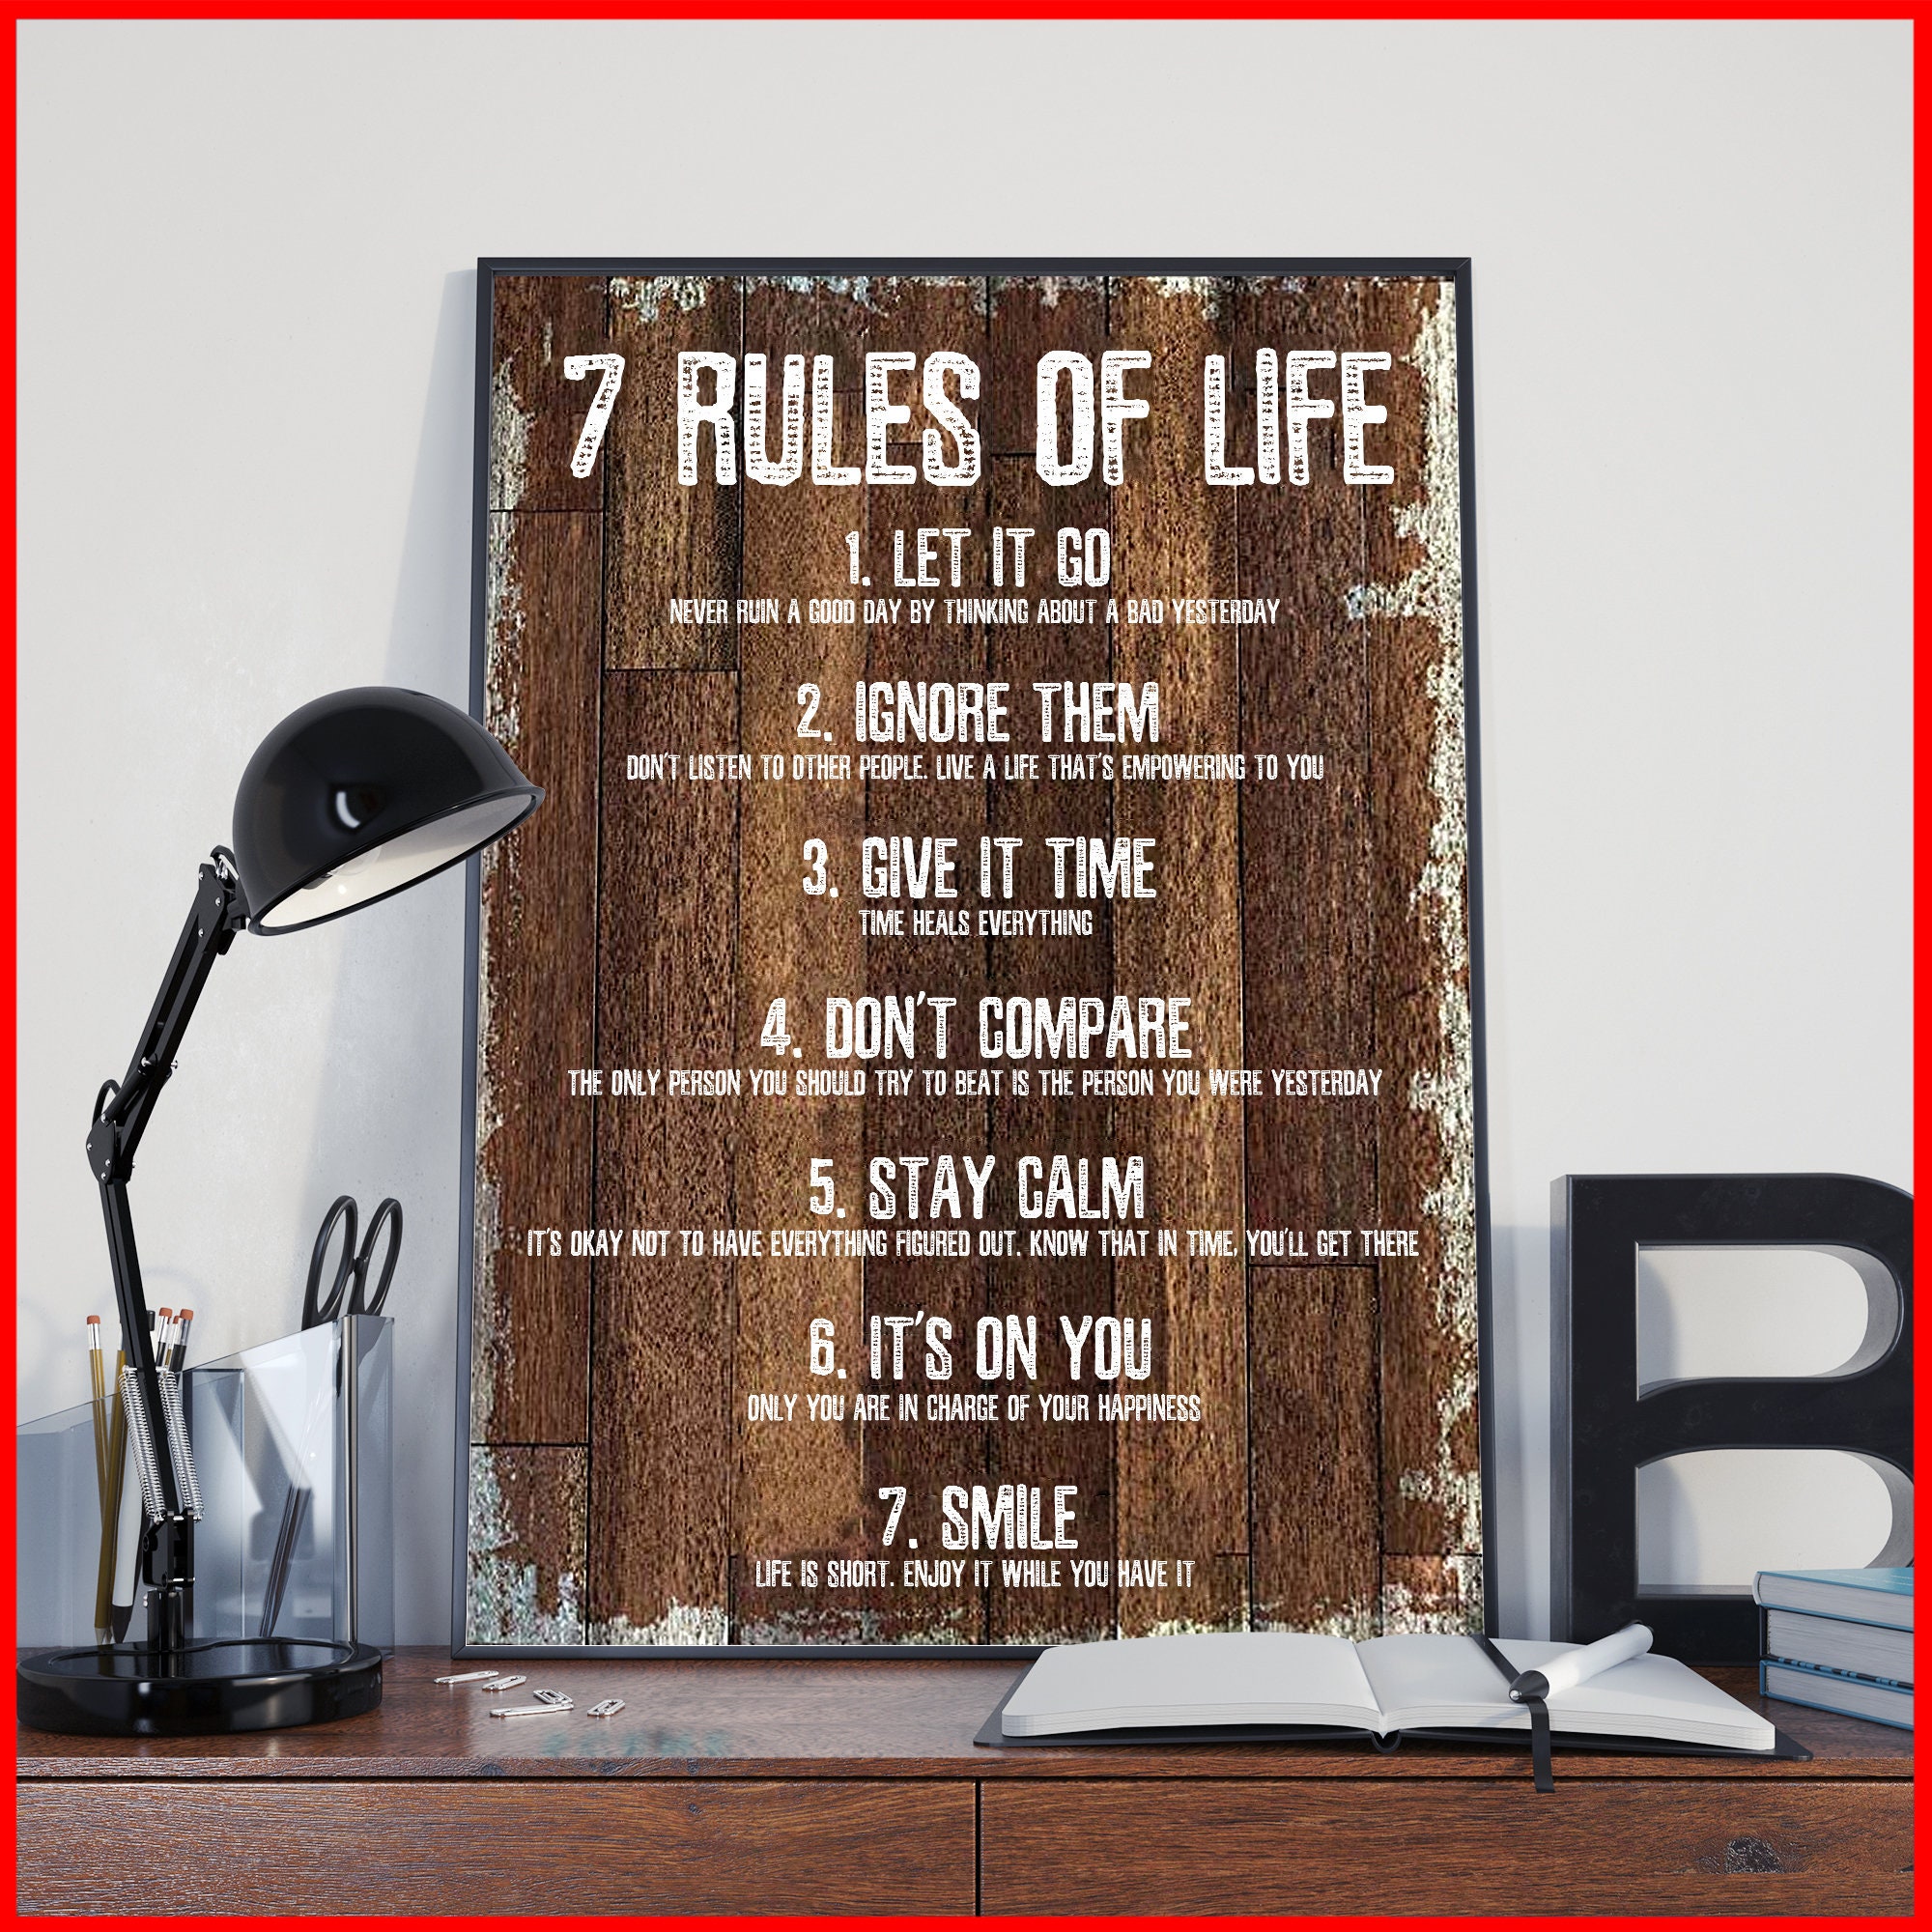 7-rules-of-life-inspirational-motto-canvas-print-wall-art-7-etsy